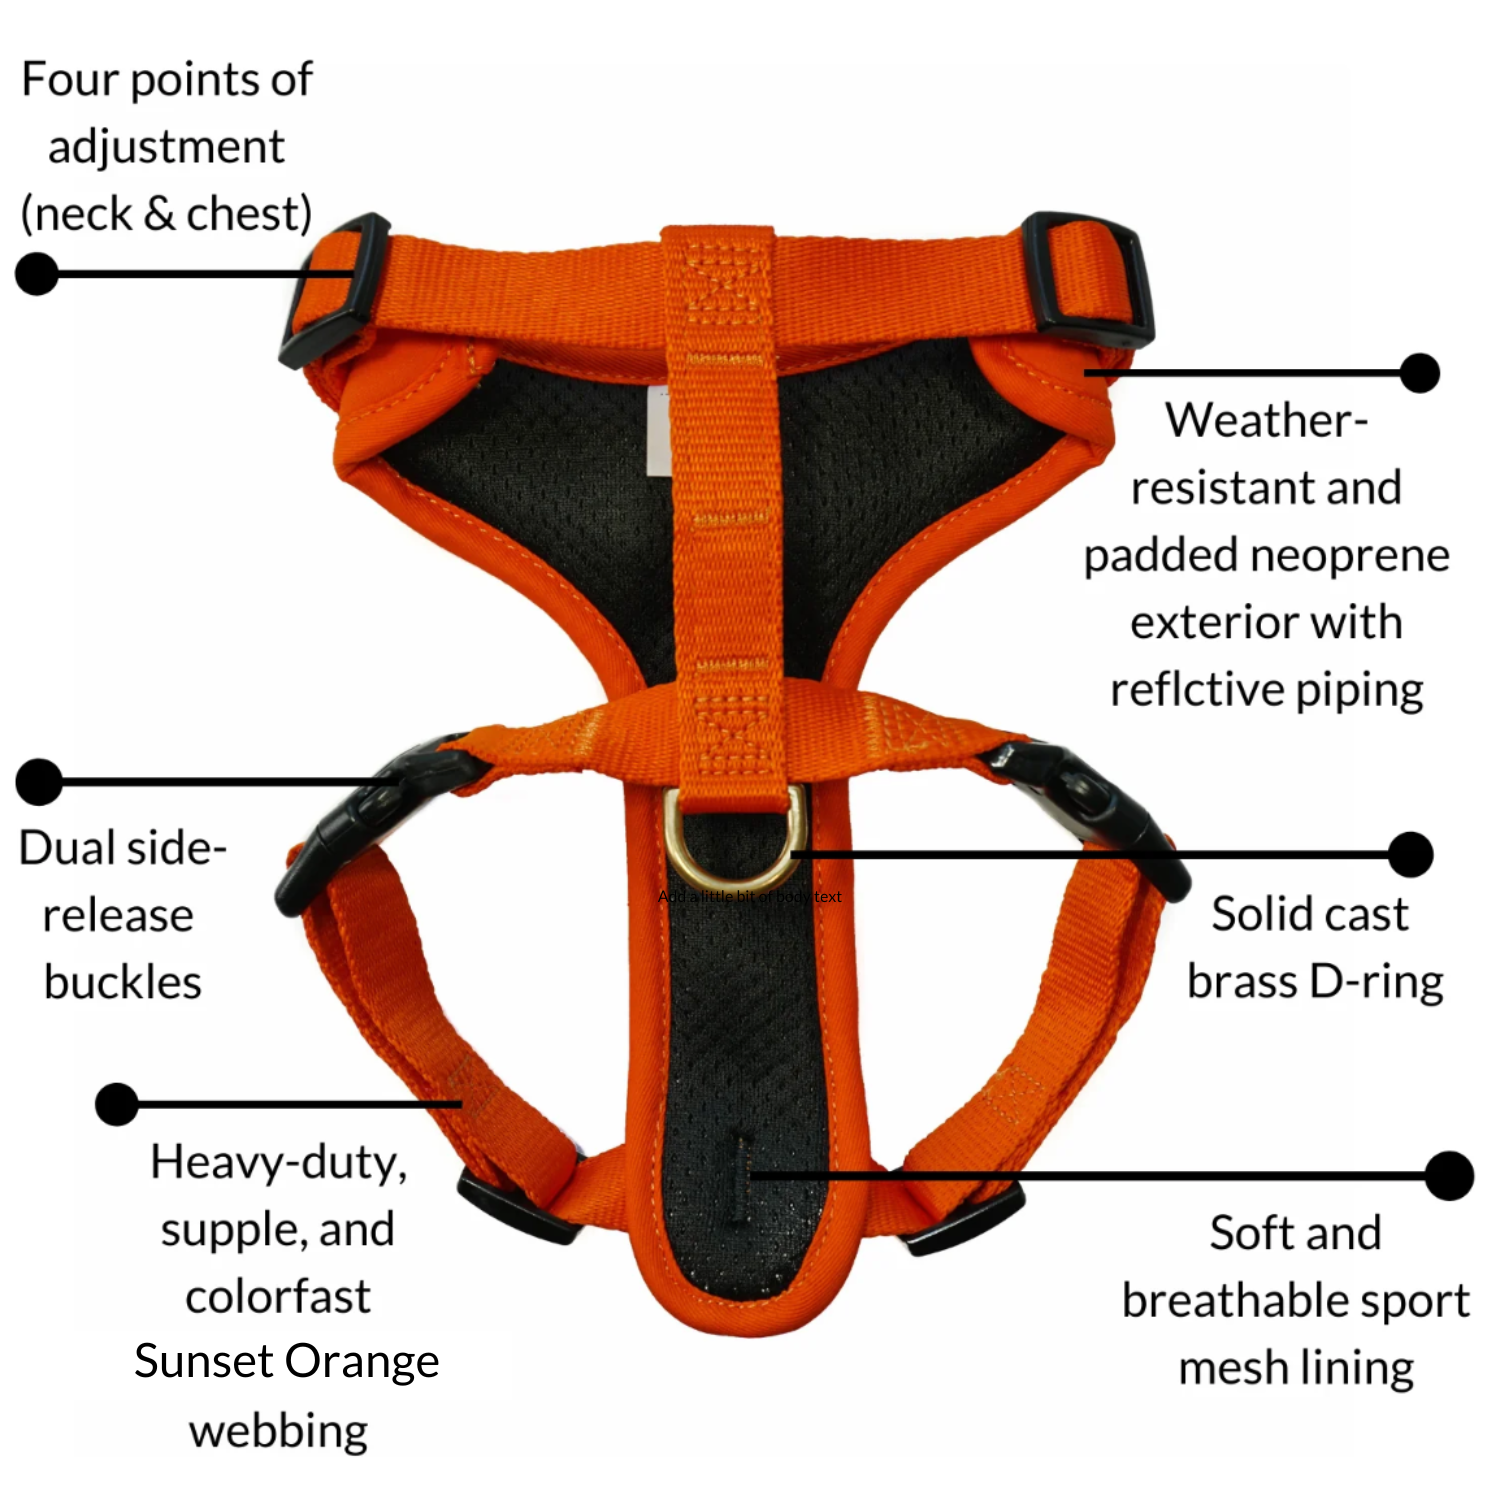 DJANGO's Adventure Dog Harness features a water-resistant and durable neoprene exterior, a lightweight and padded dog harness body, super soft custom webbing for max comfort, reflective piping for low light adventures, secure side release buckles for easy on and off, and a beautiful solid cast brass D-ring - djangobrand.com